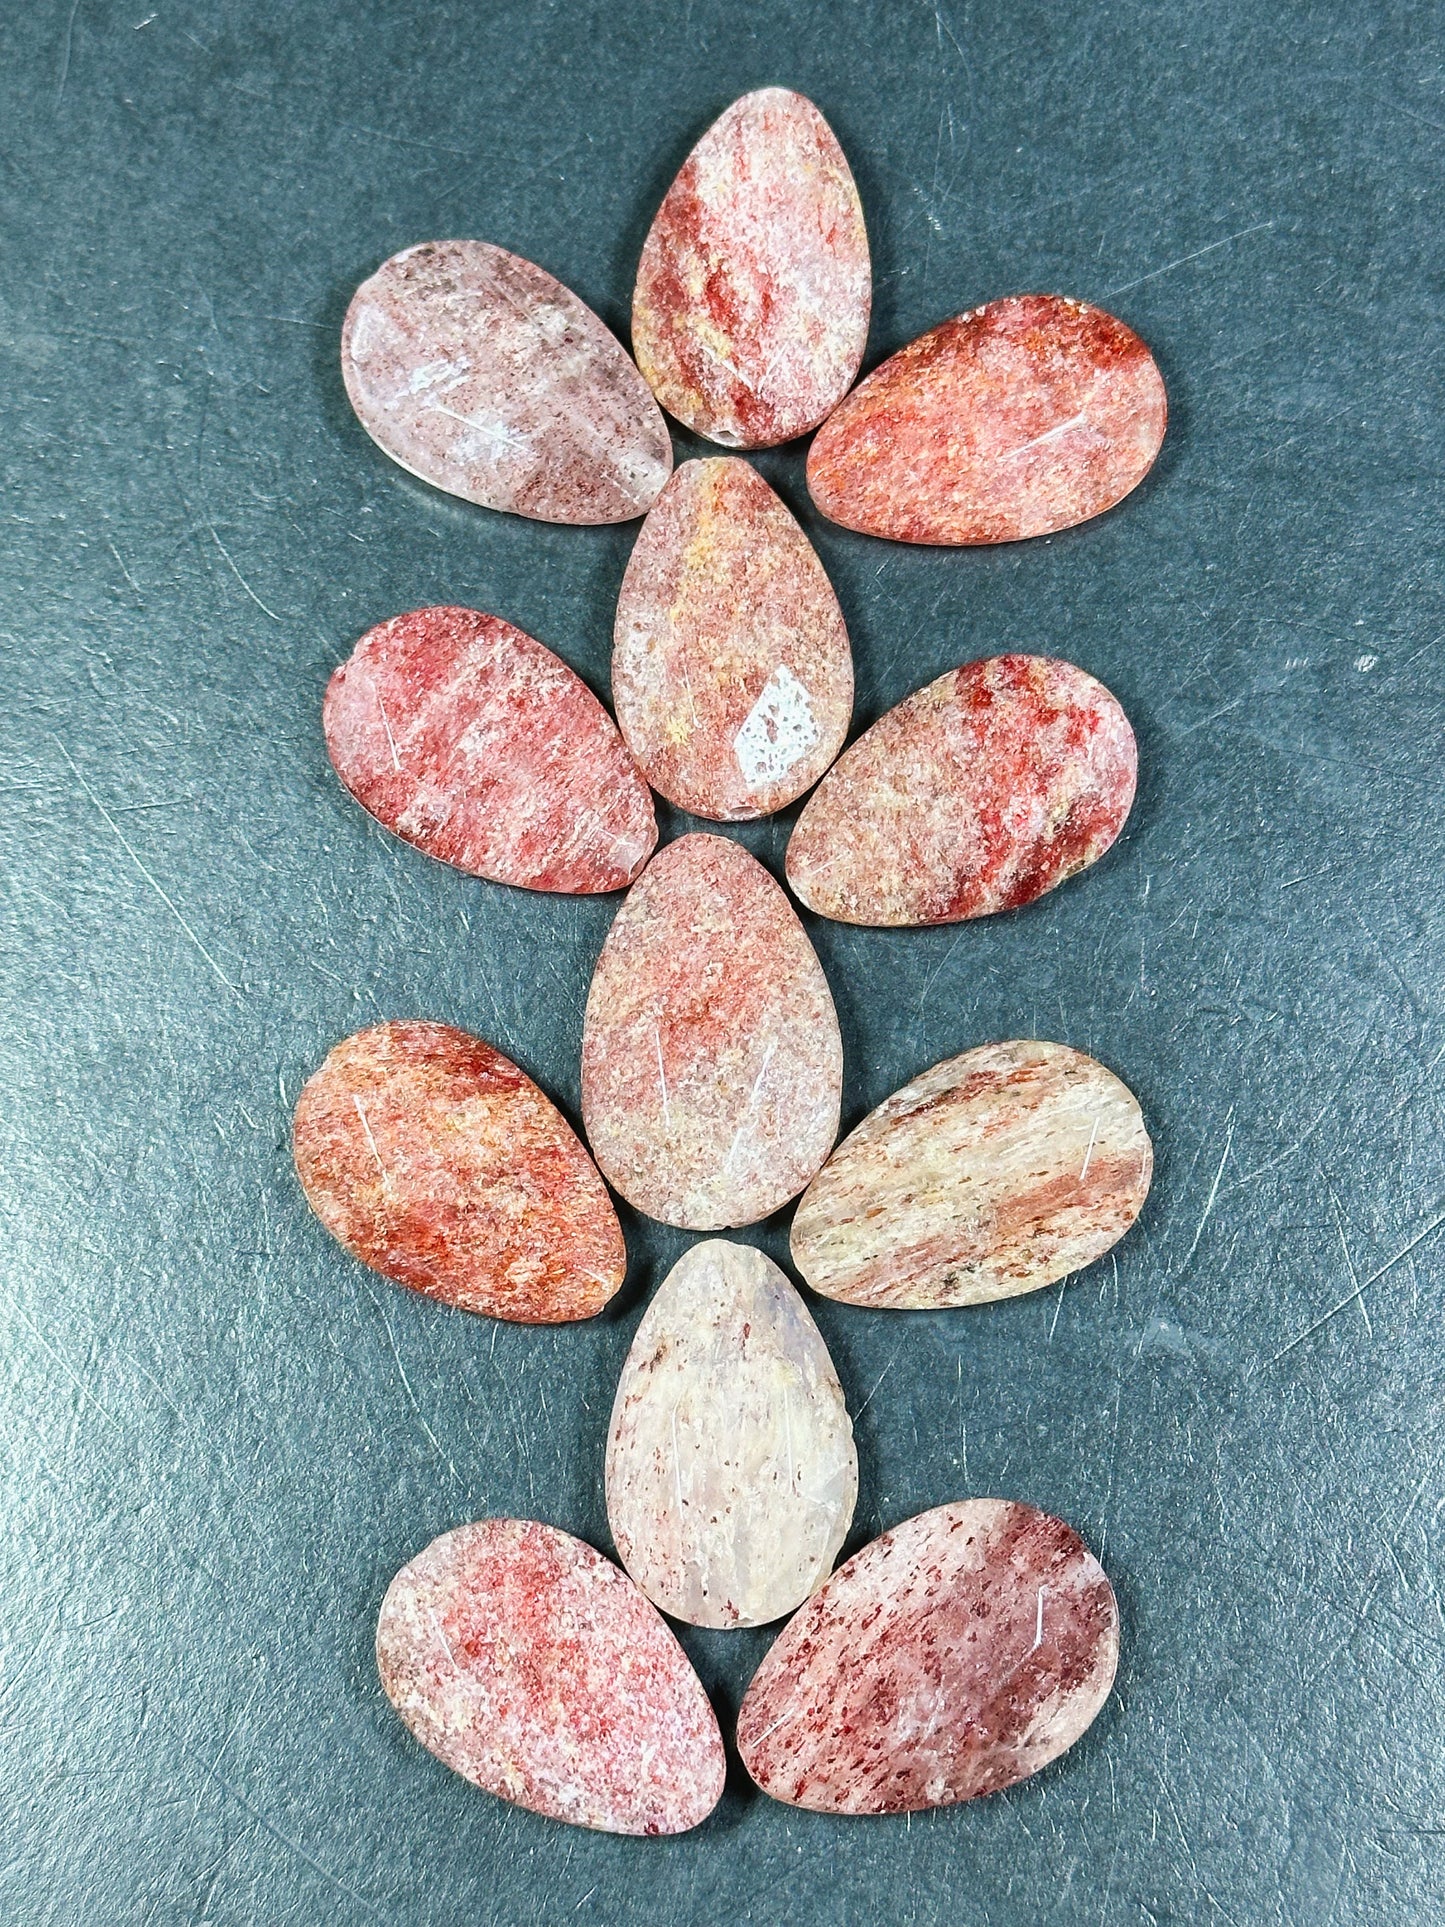 NATURAL Strawberry Quartz Gemstone Bead Faceted 30x20mm Teardrop Shape, Gorgeous Red Pink Color Strawberry Quartz Gemstone Bead, LOOSE Beads